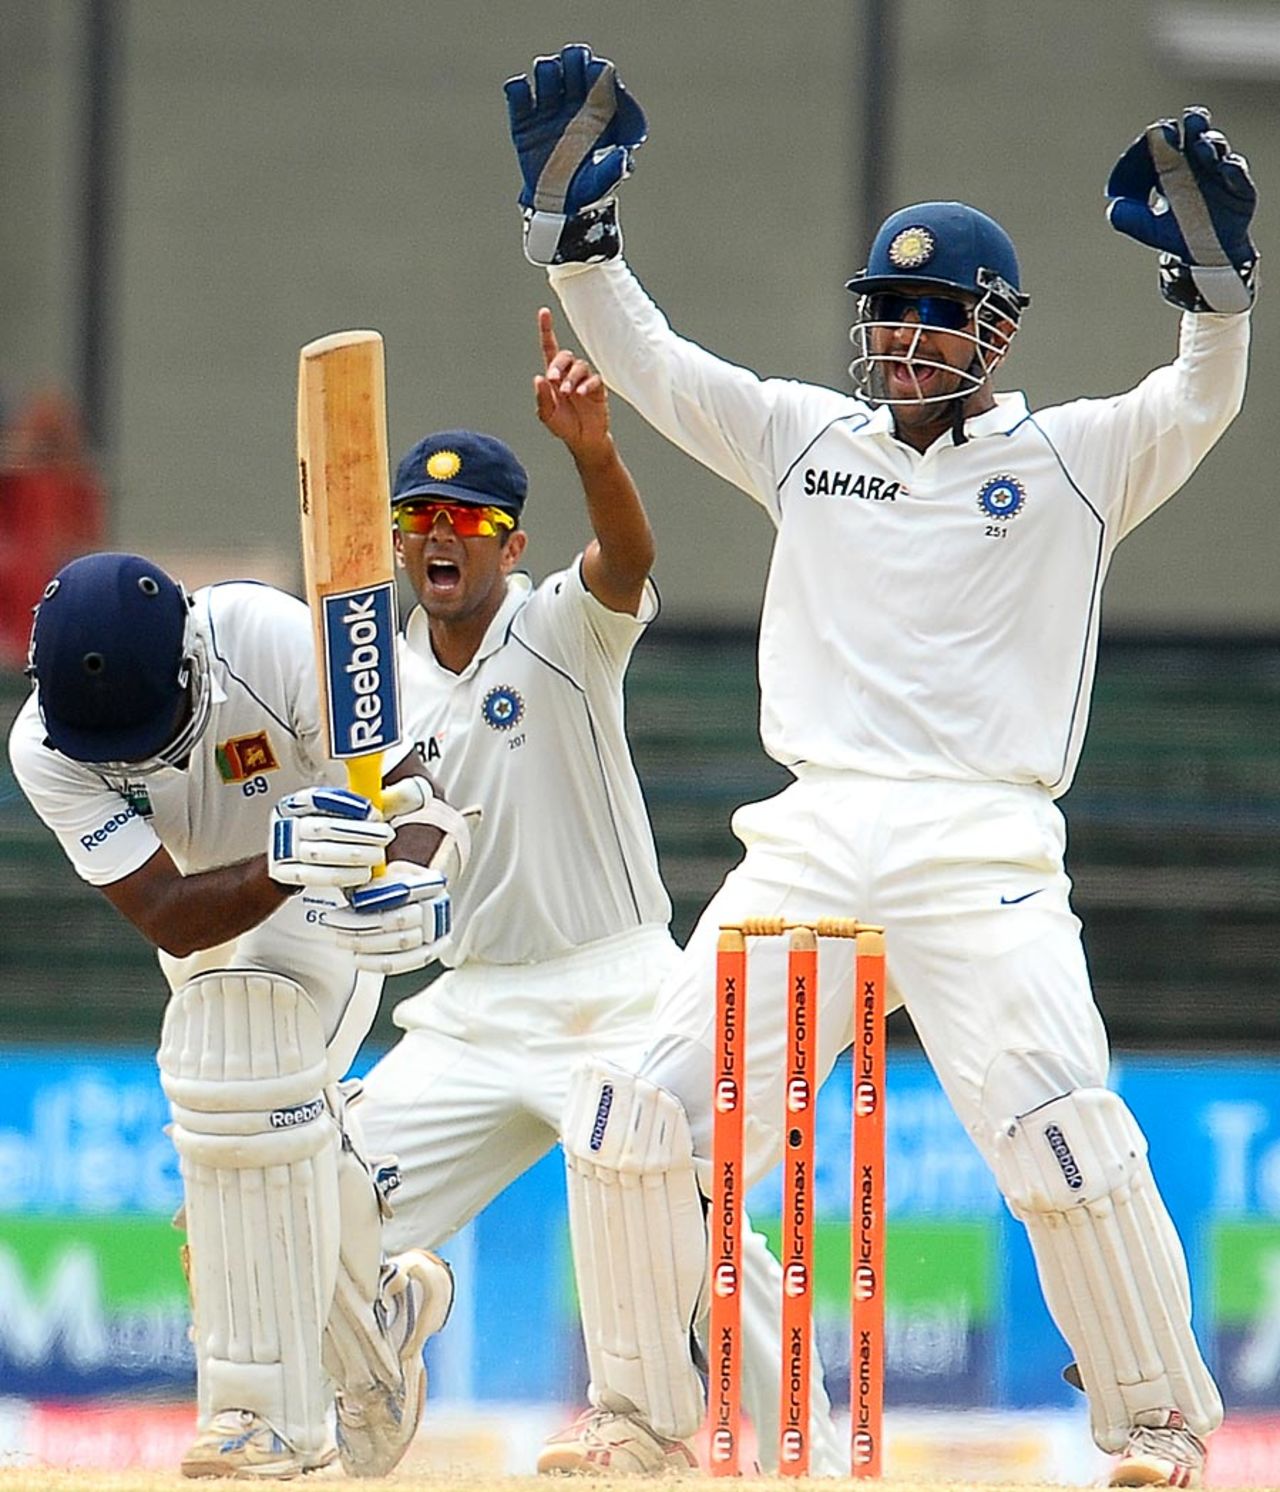 Mahela Jayawardene is trapped in front by Virender Sehwag, Sri Lanka v India, 2nd Test, SSC, 5th day, July 30, 2010